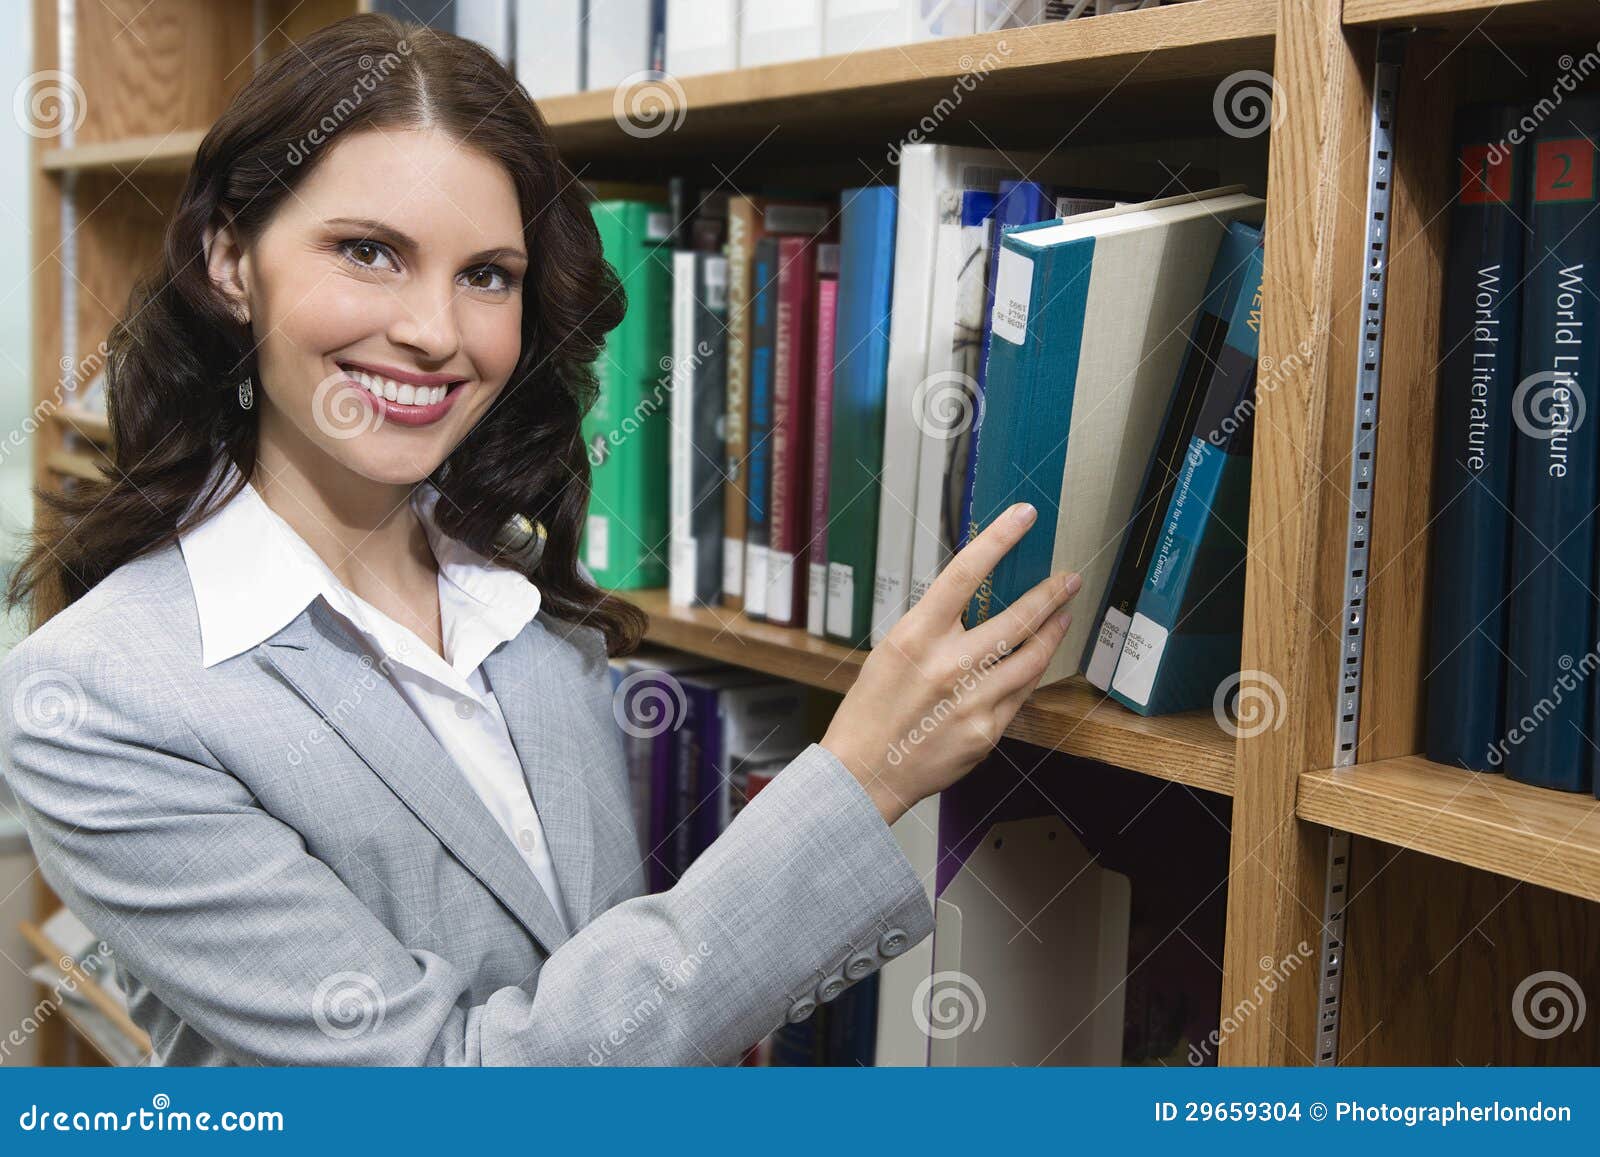 female selecting book from shelf